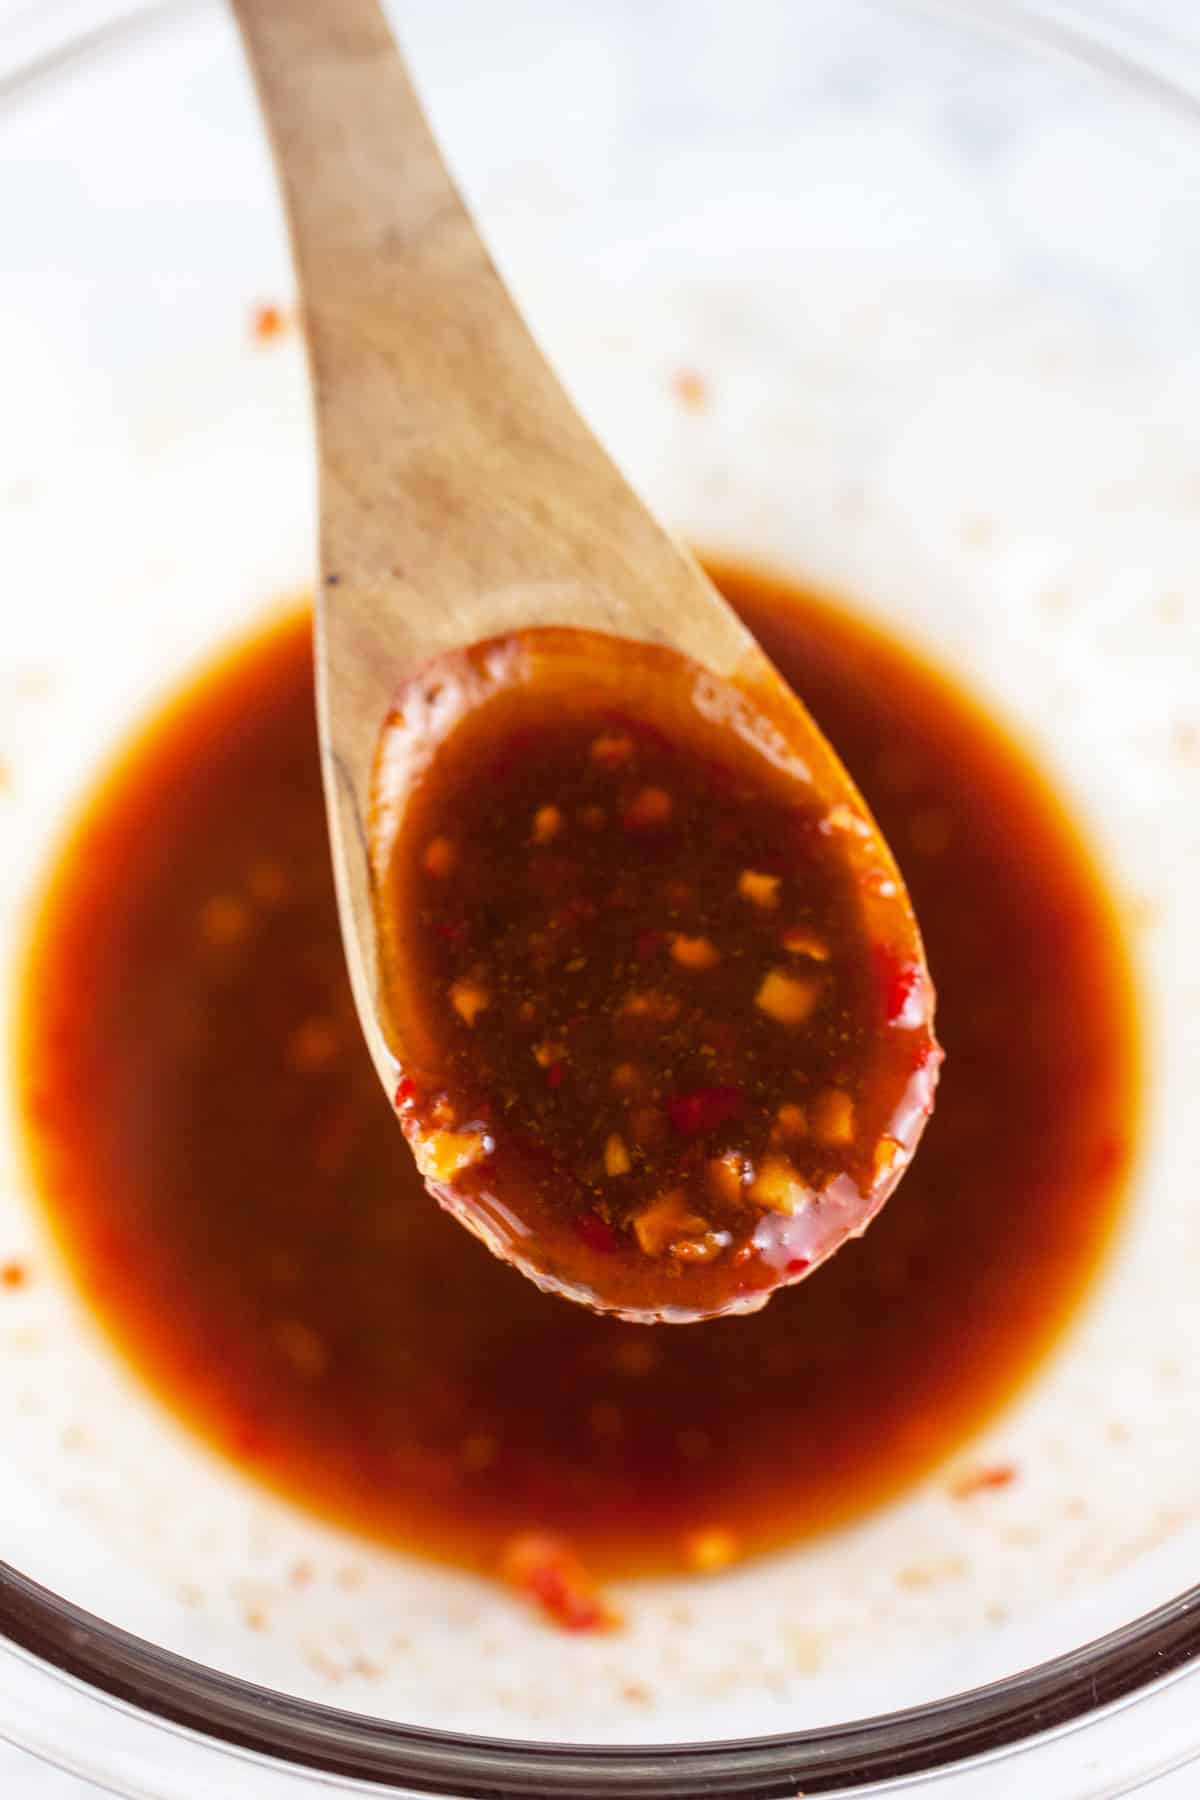 Sweet and spicy Asian sauce lifted from small glass bowl on wooden spoon.